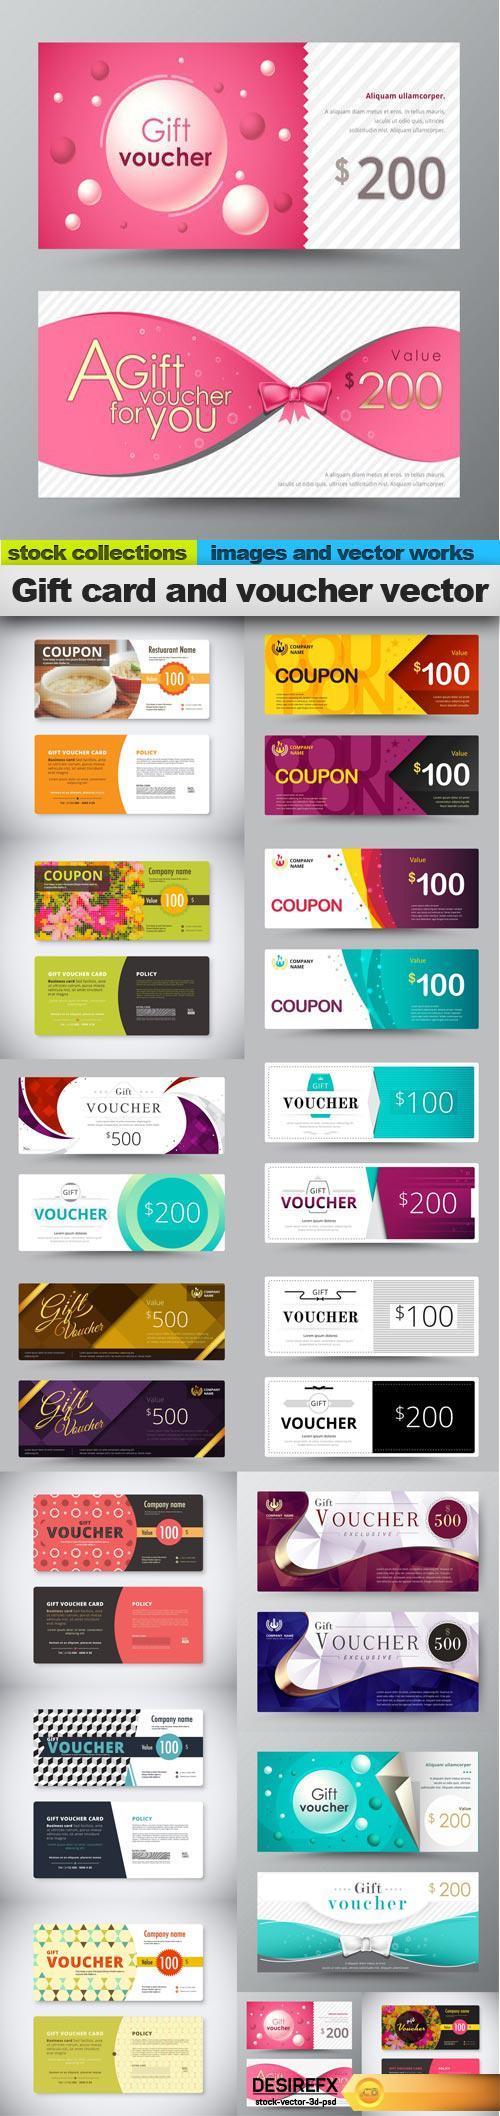 Gift card and voucher vector, 15 x EPS